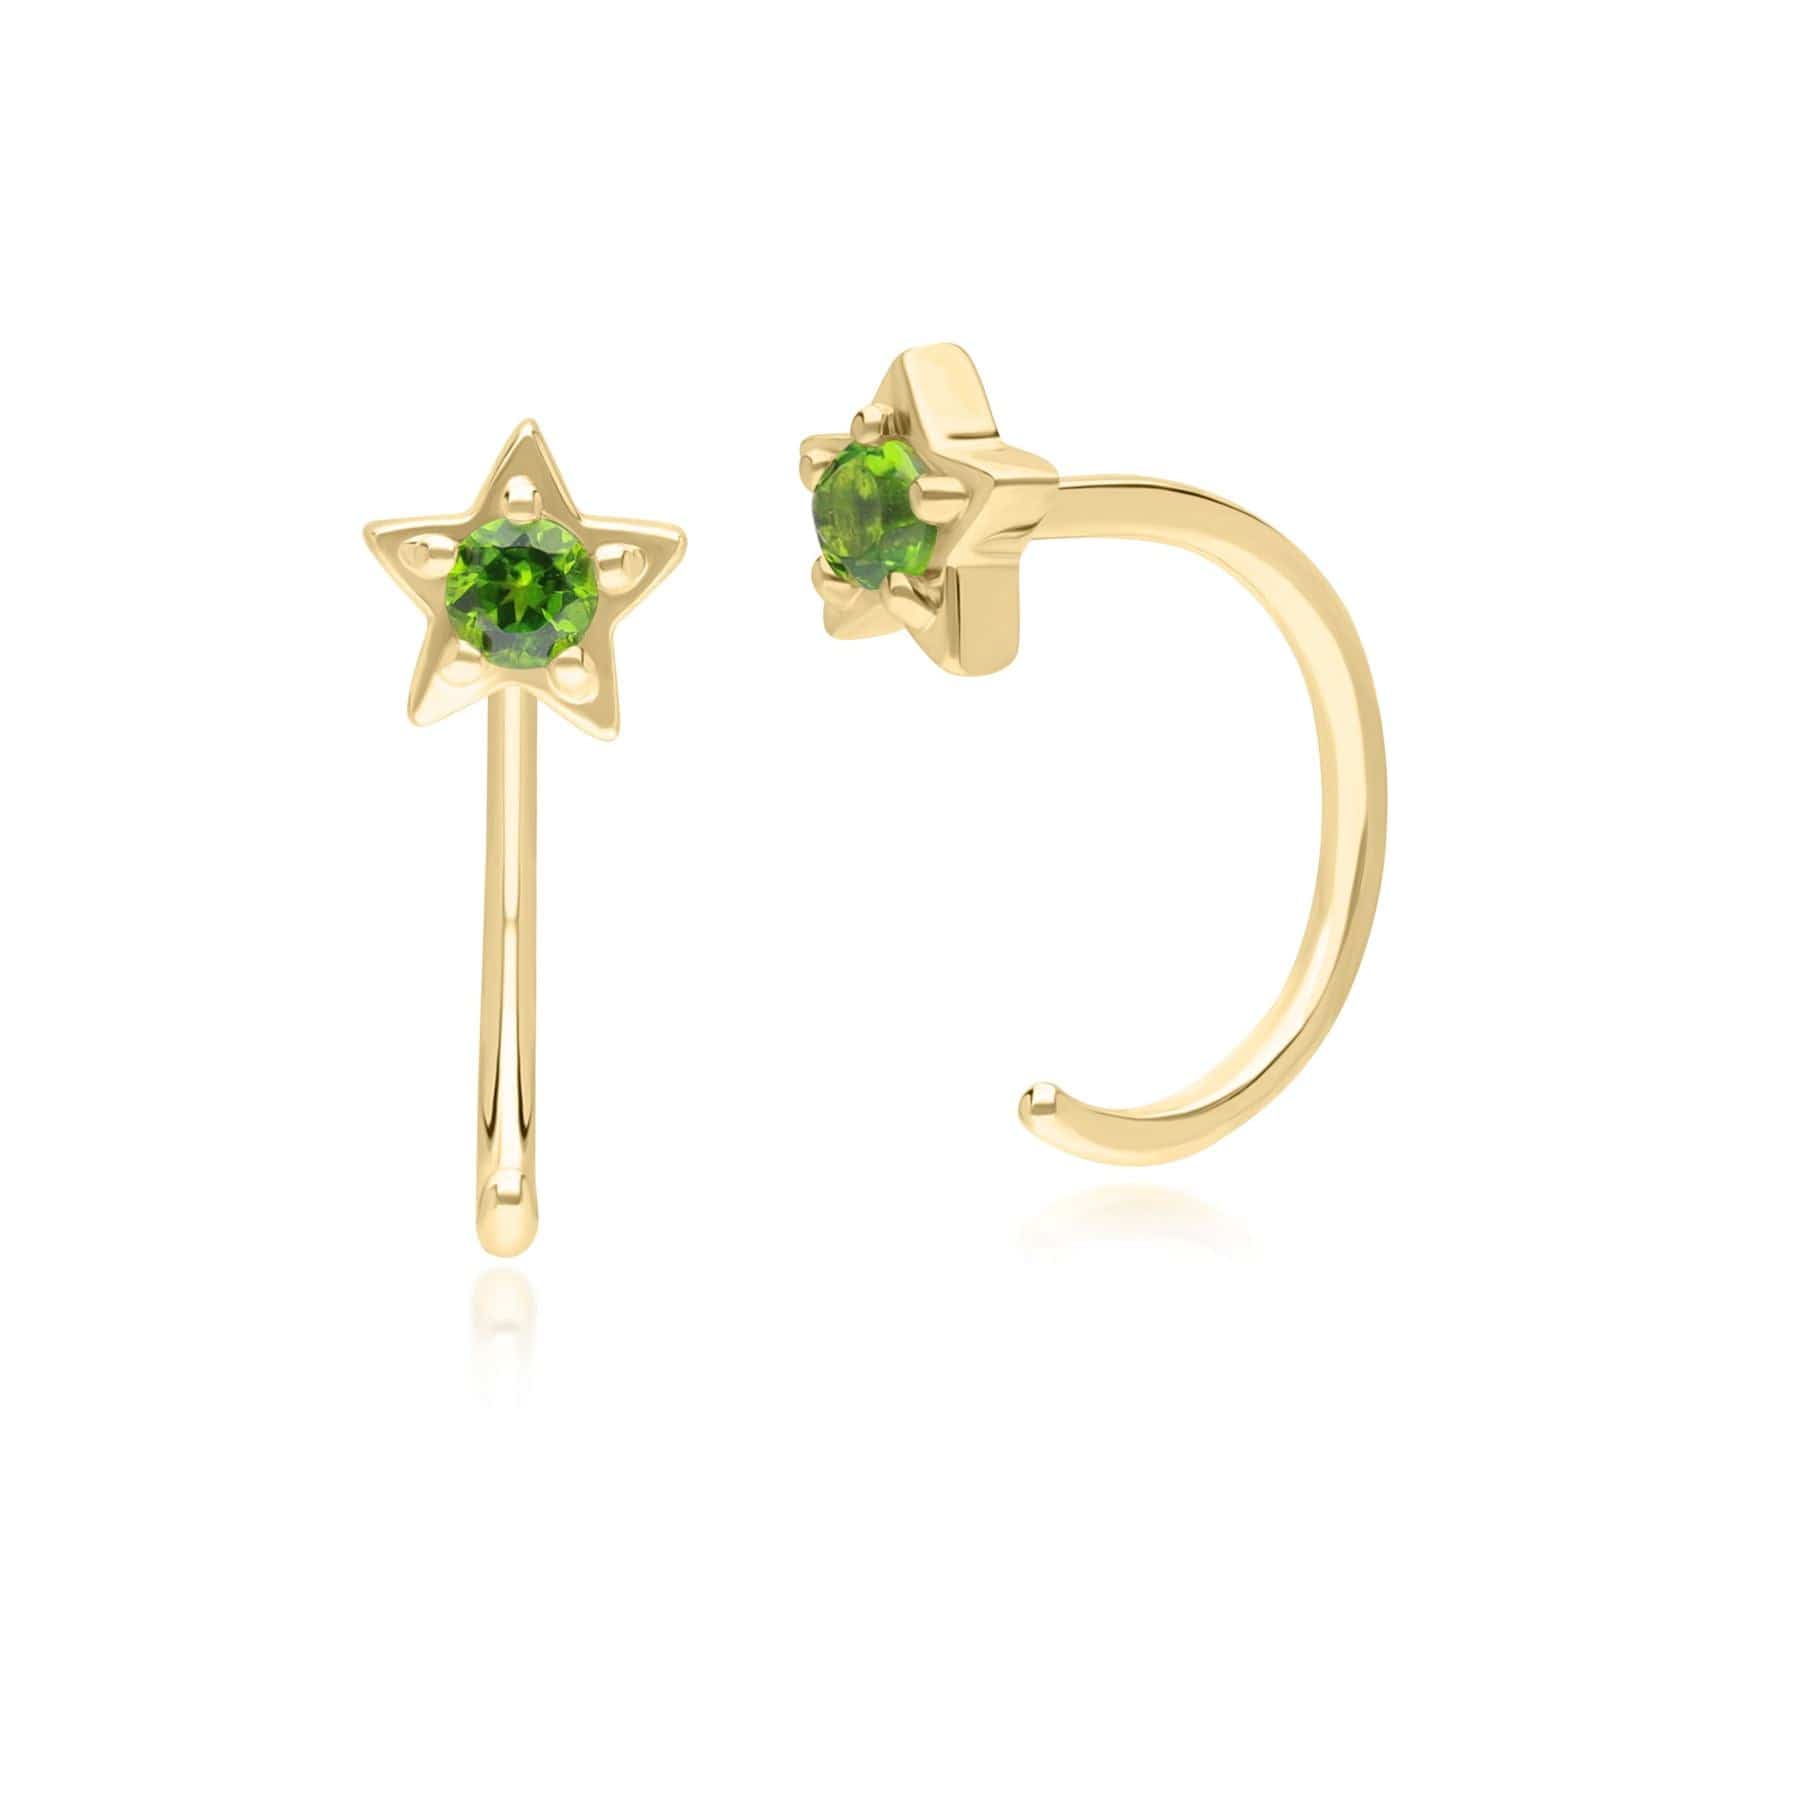 135E1822019 Modern Classic Chrome Diopside Pull Through Hoop Earrings in 9ct Yellow Gold Front